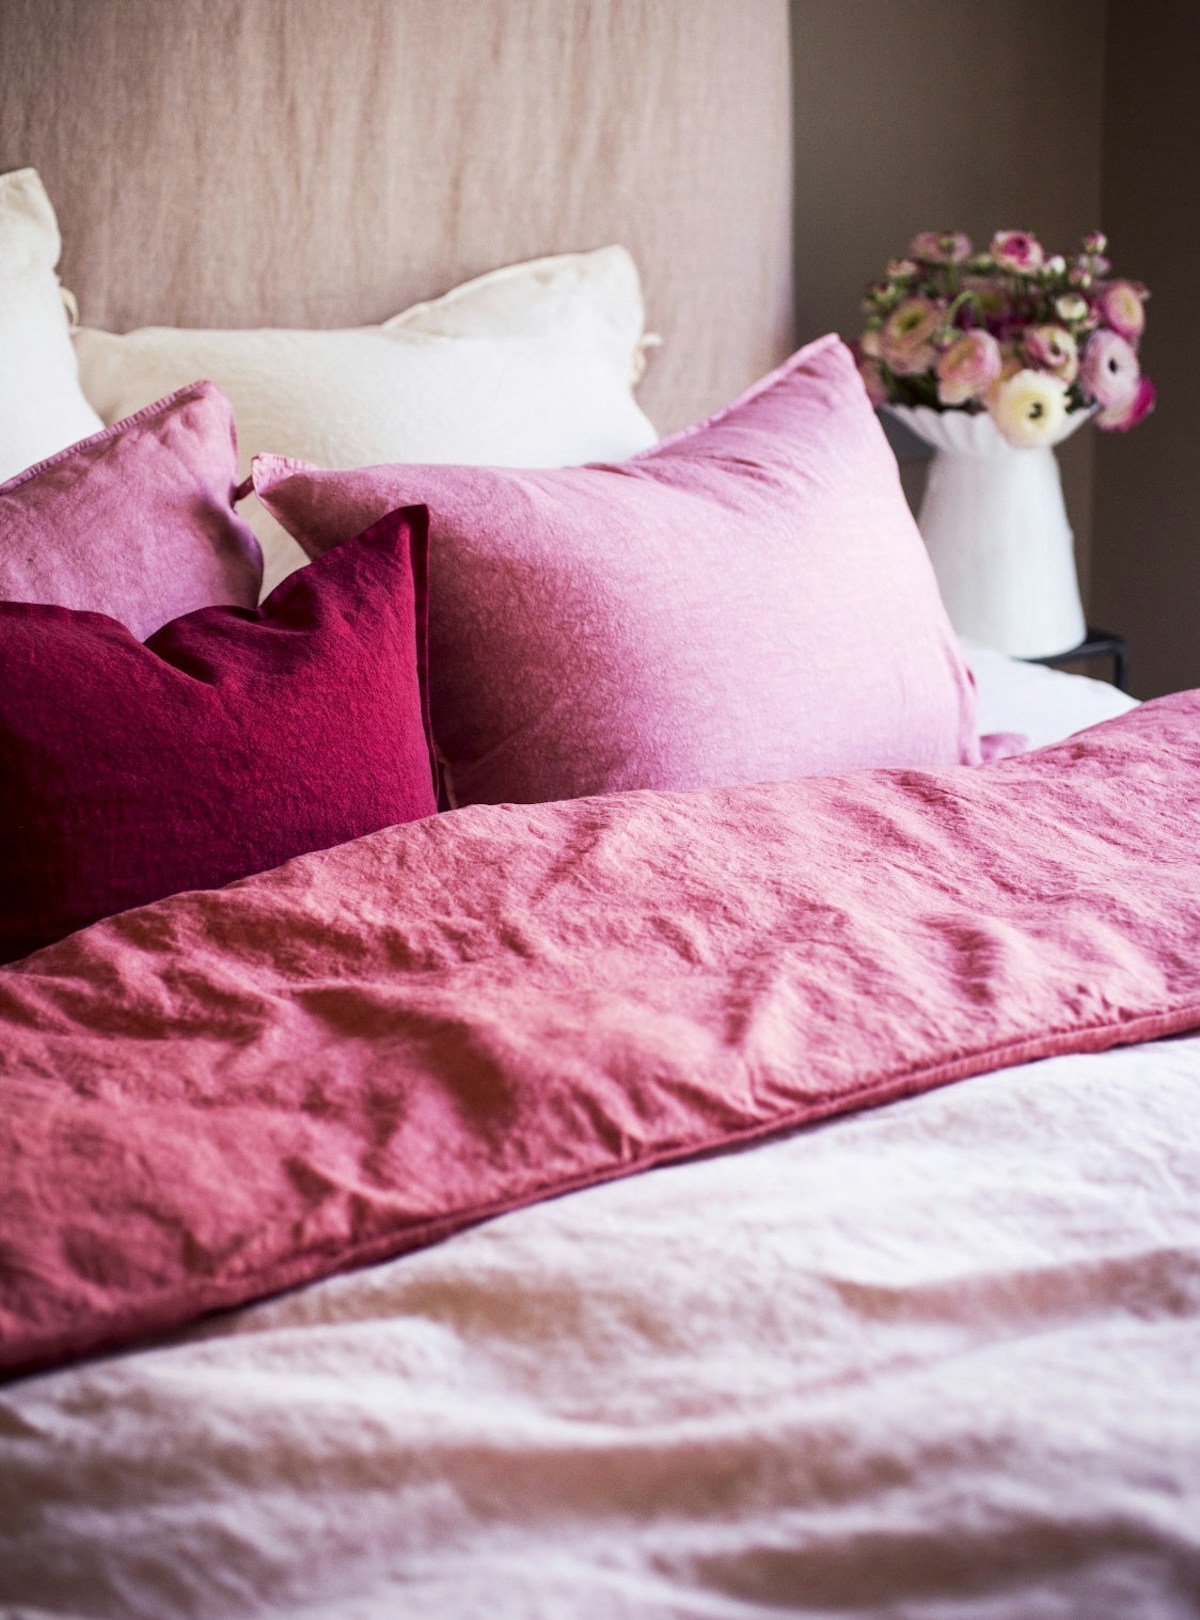 Pink Bedding - Pink Bedroom Ideas - How to Decorate Rooms with Pink - LuxDeco.com Style Guide